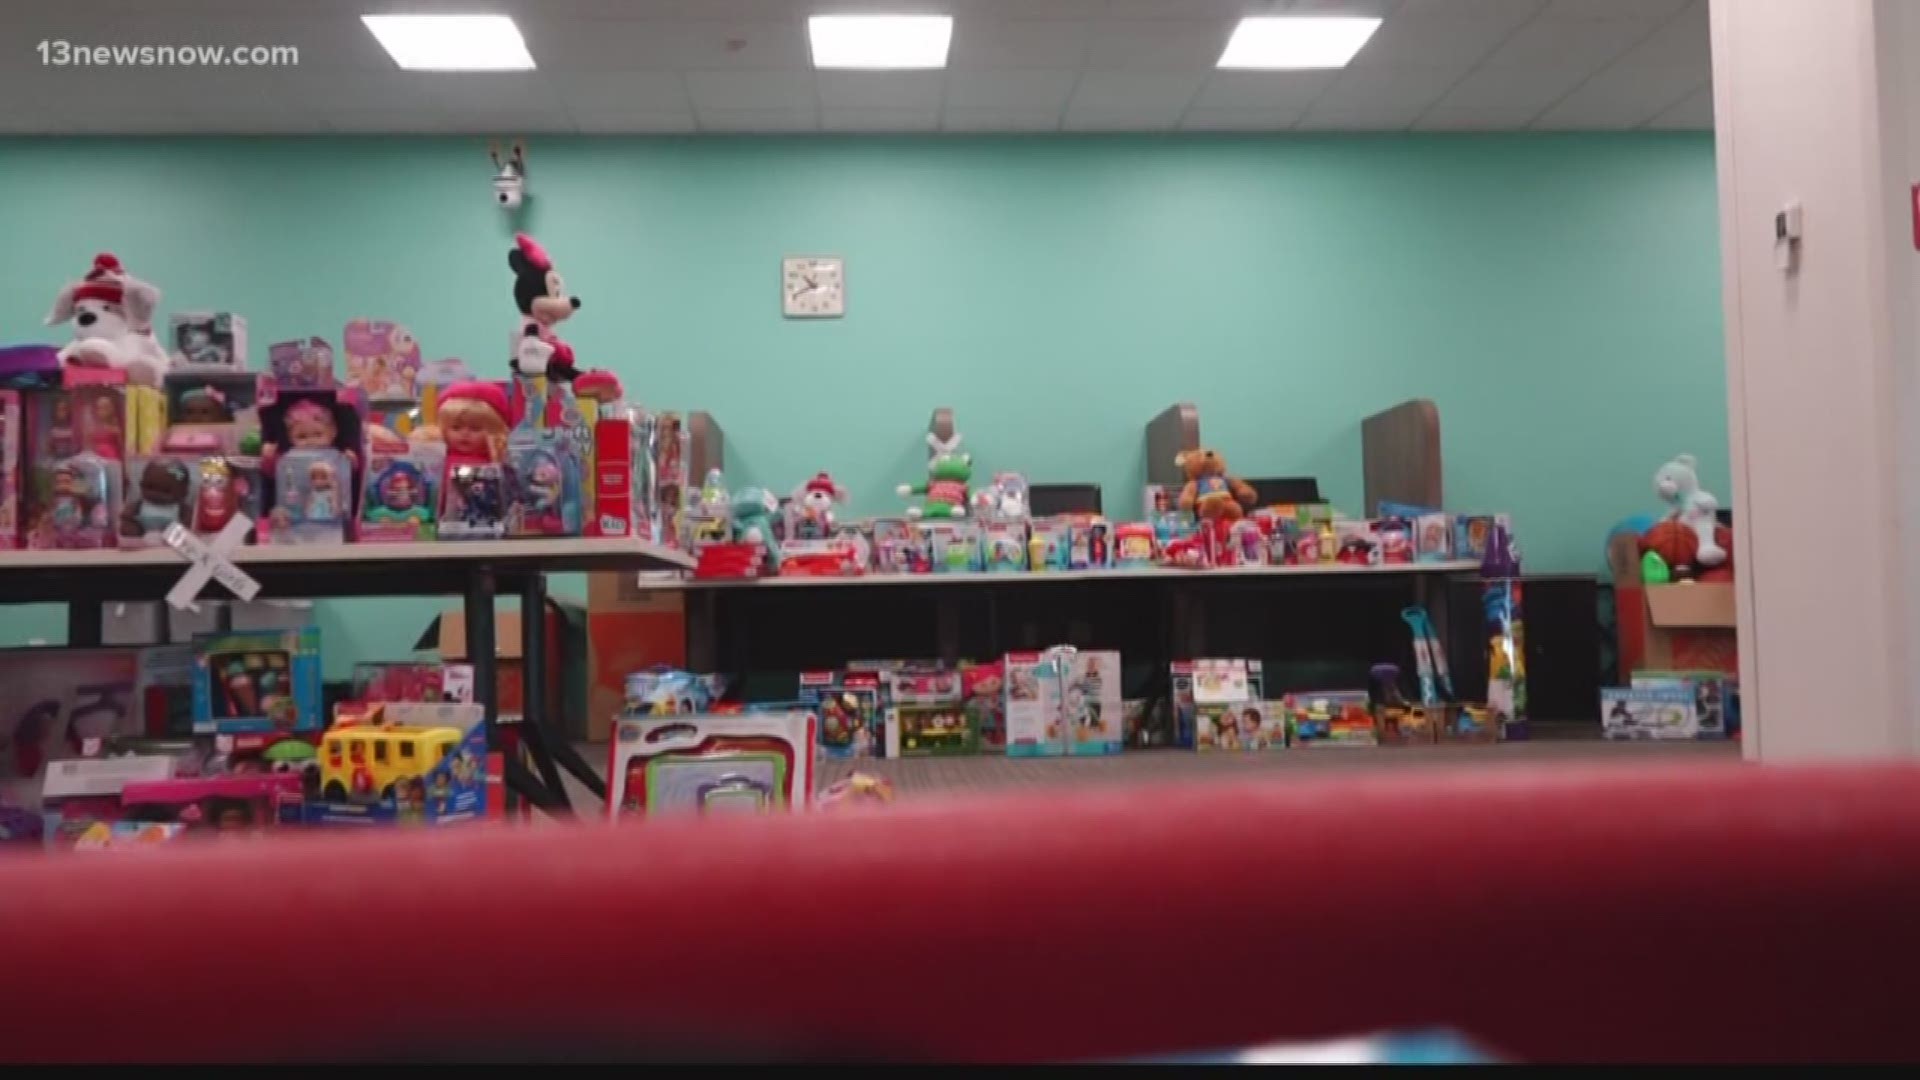 CHKD collected toys for children stuck in the hospital for Christmas. Parents were able to pick out toys for not only their sick children, but their other children as well.